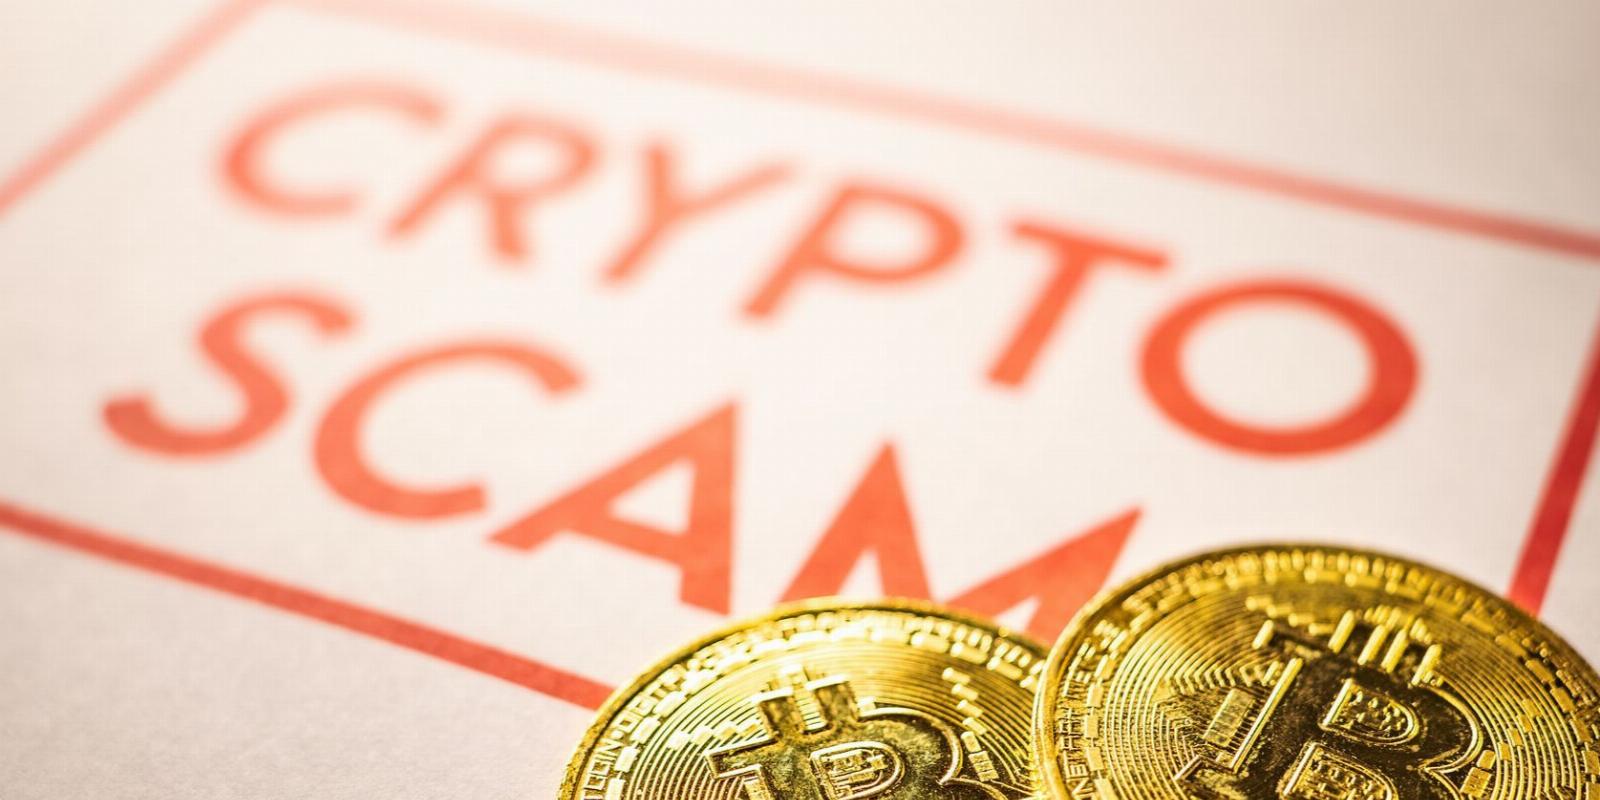 What Are BingChatGPT Crypto Scam Tokens and How Can You Spot Them?